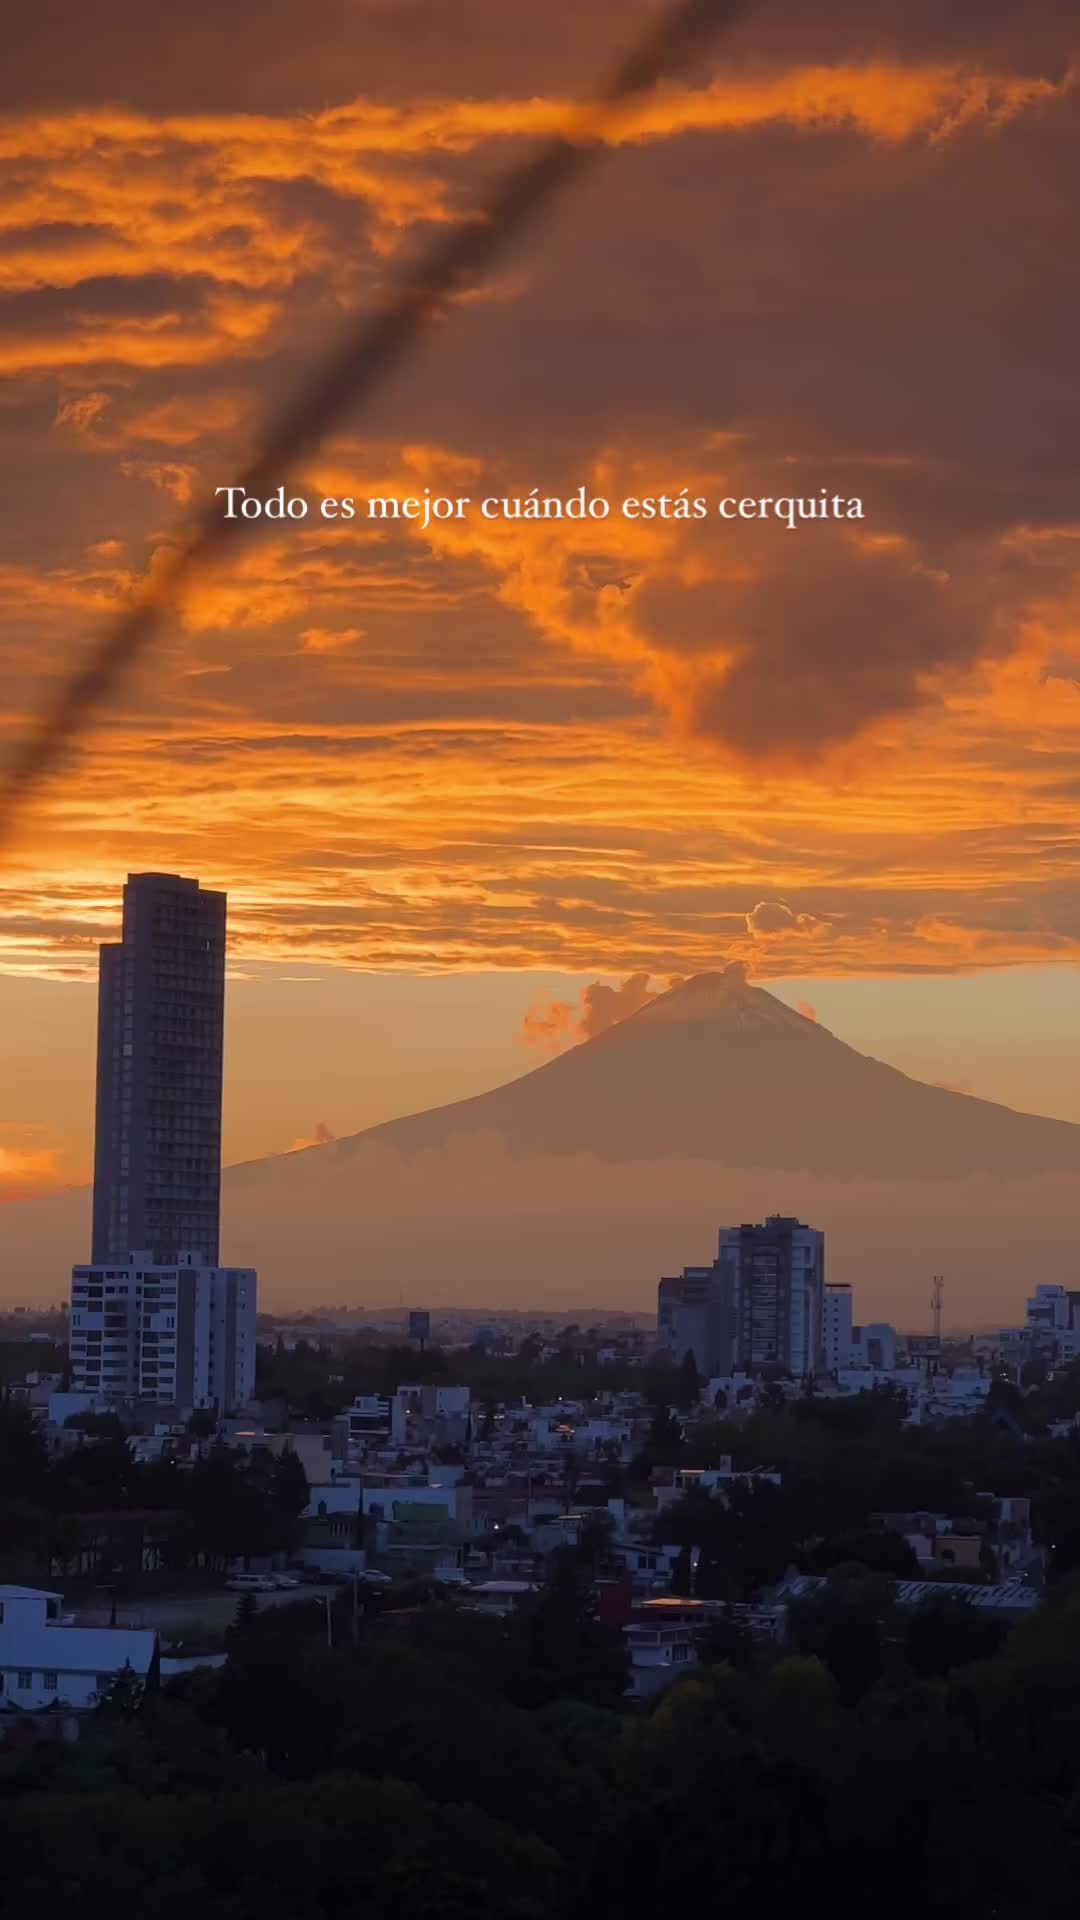 Stunning Puebla City Sunset: Who Comes to Mind?